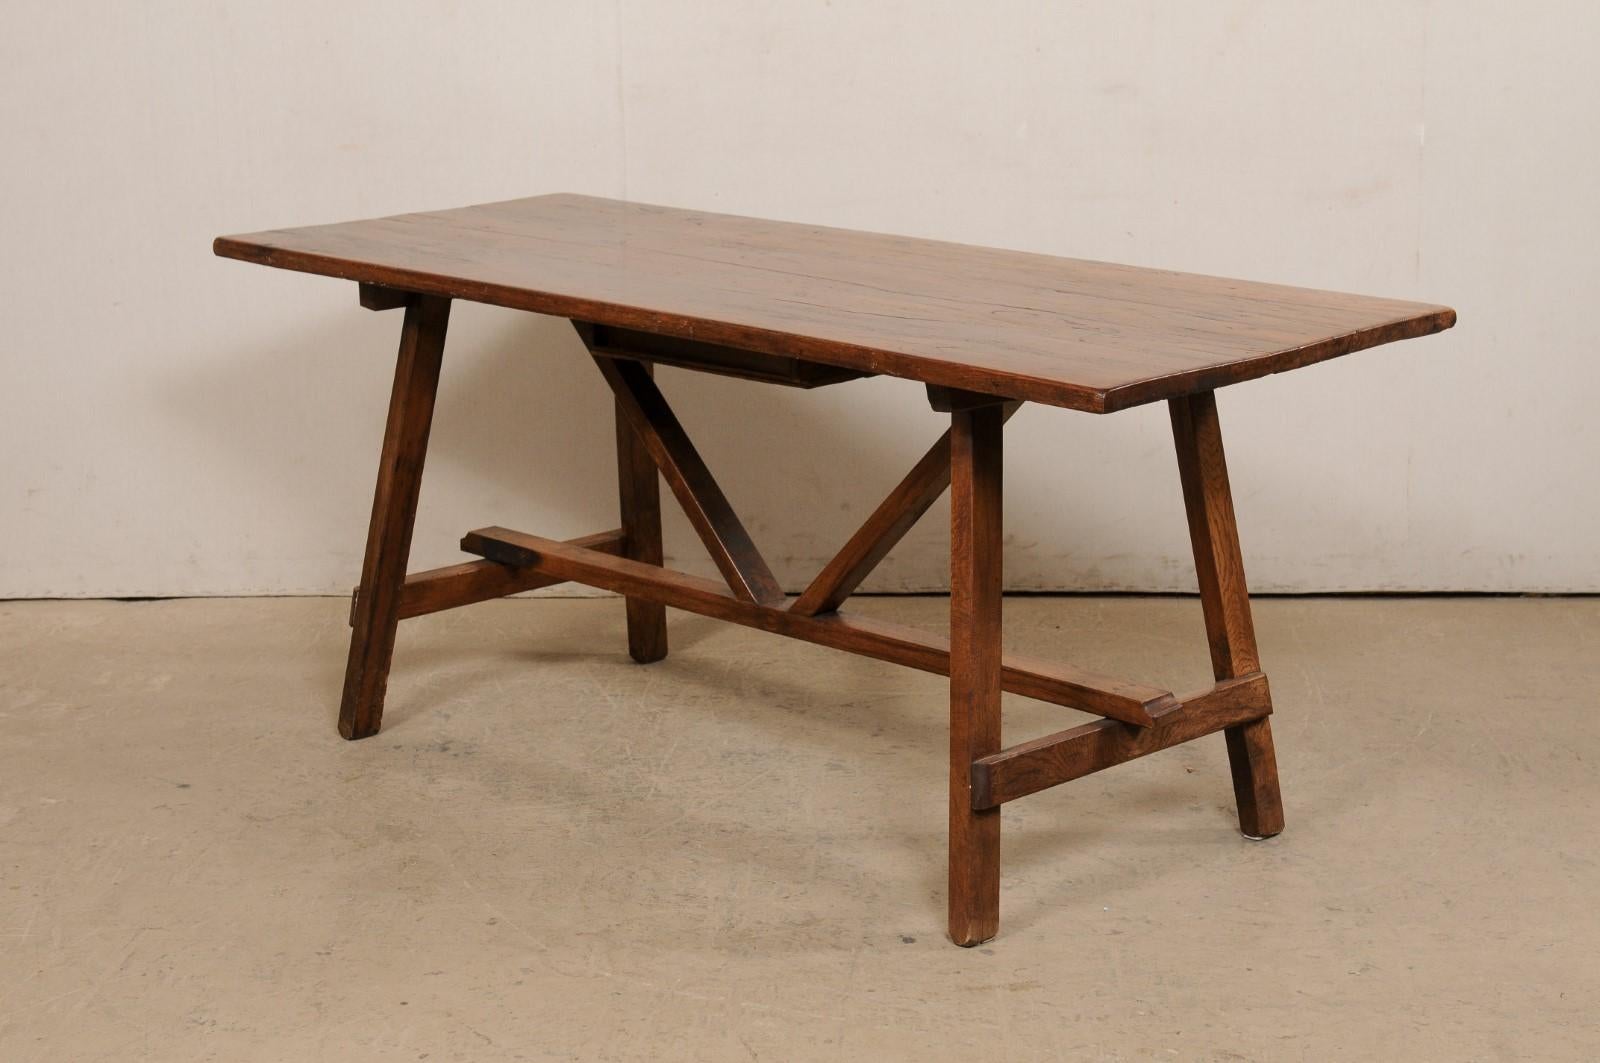 Early 18th C. Italian Walnut Table with V-Stretcher, a Great Desk Option 2